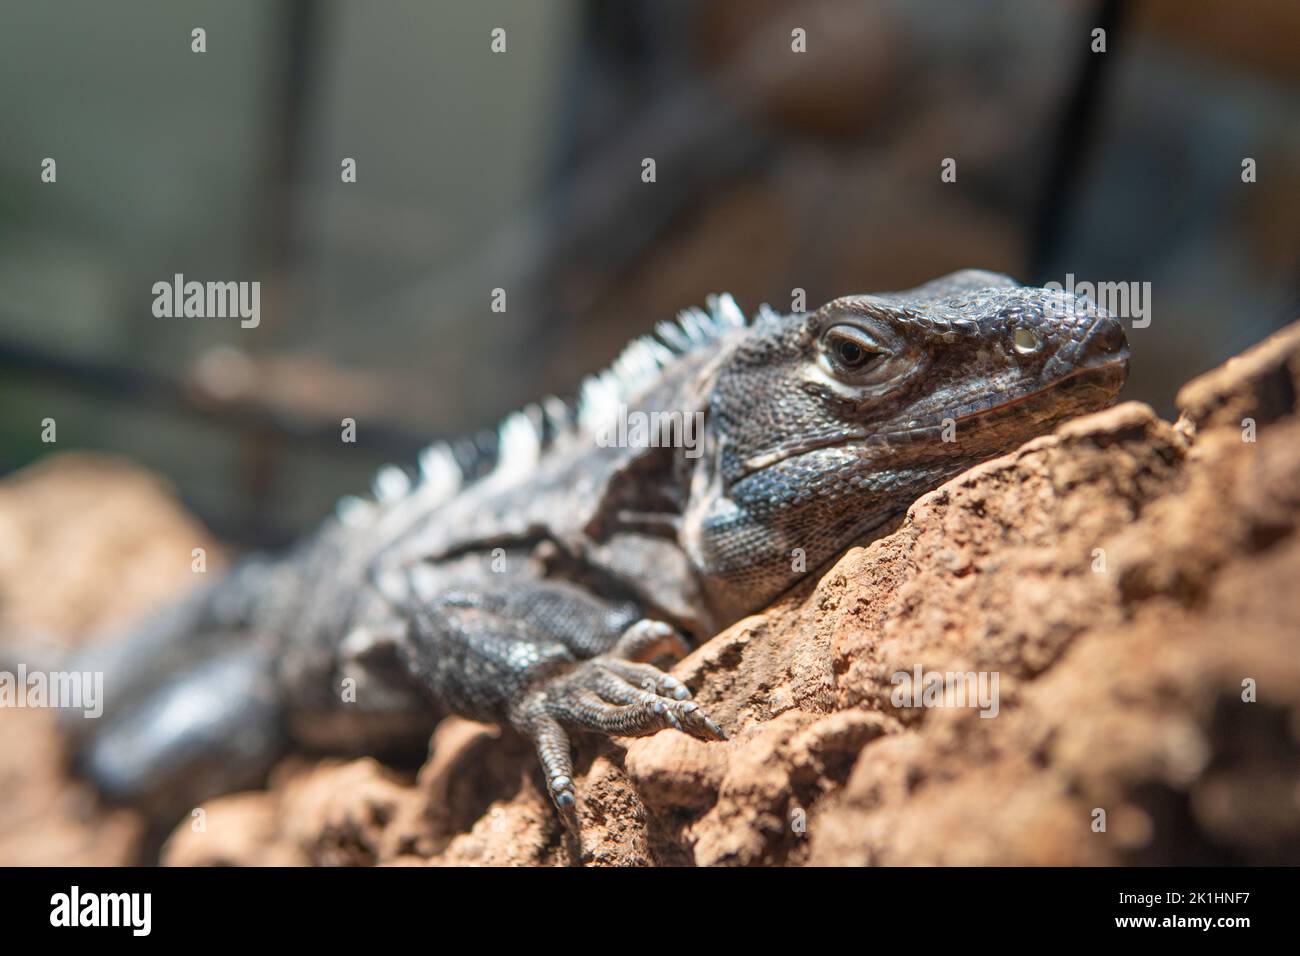 Animal lizard reptile background wild nature wildlife green predator, from cute tropical in reptilian and closeup vertebrate, pet scales. Camouflage Stock Photo